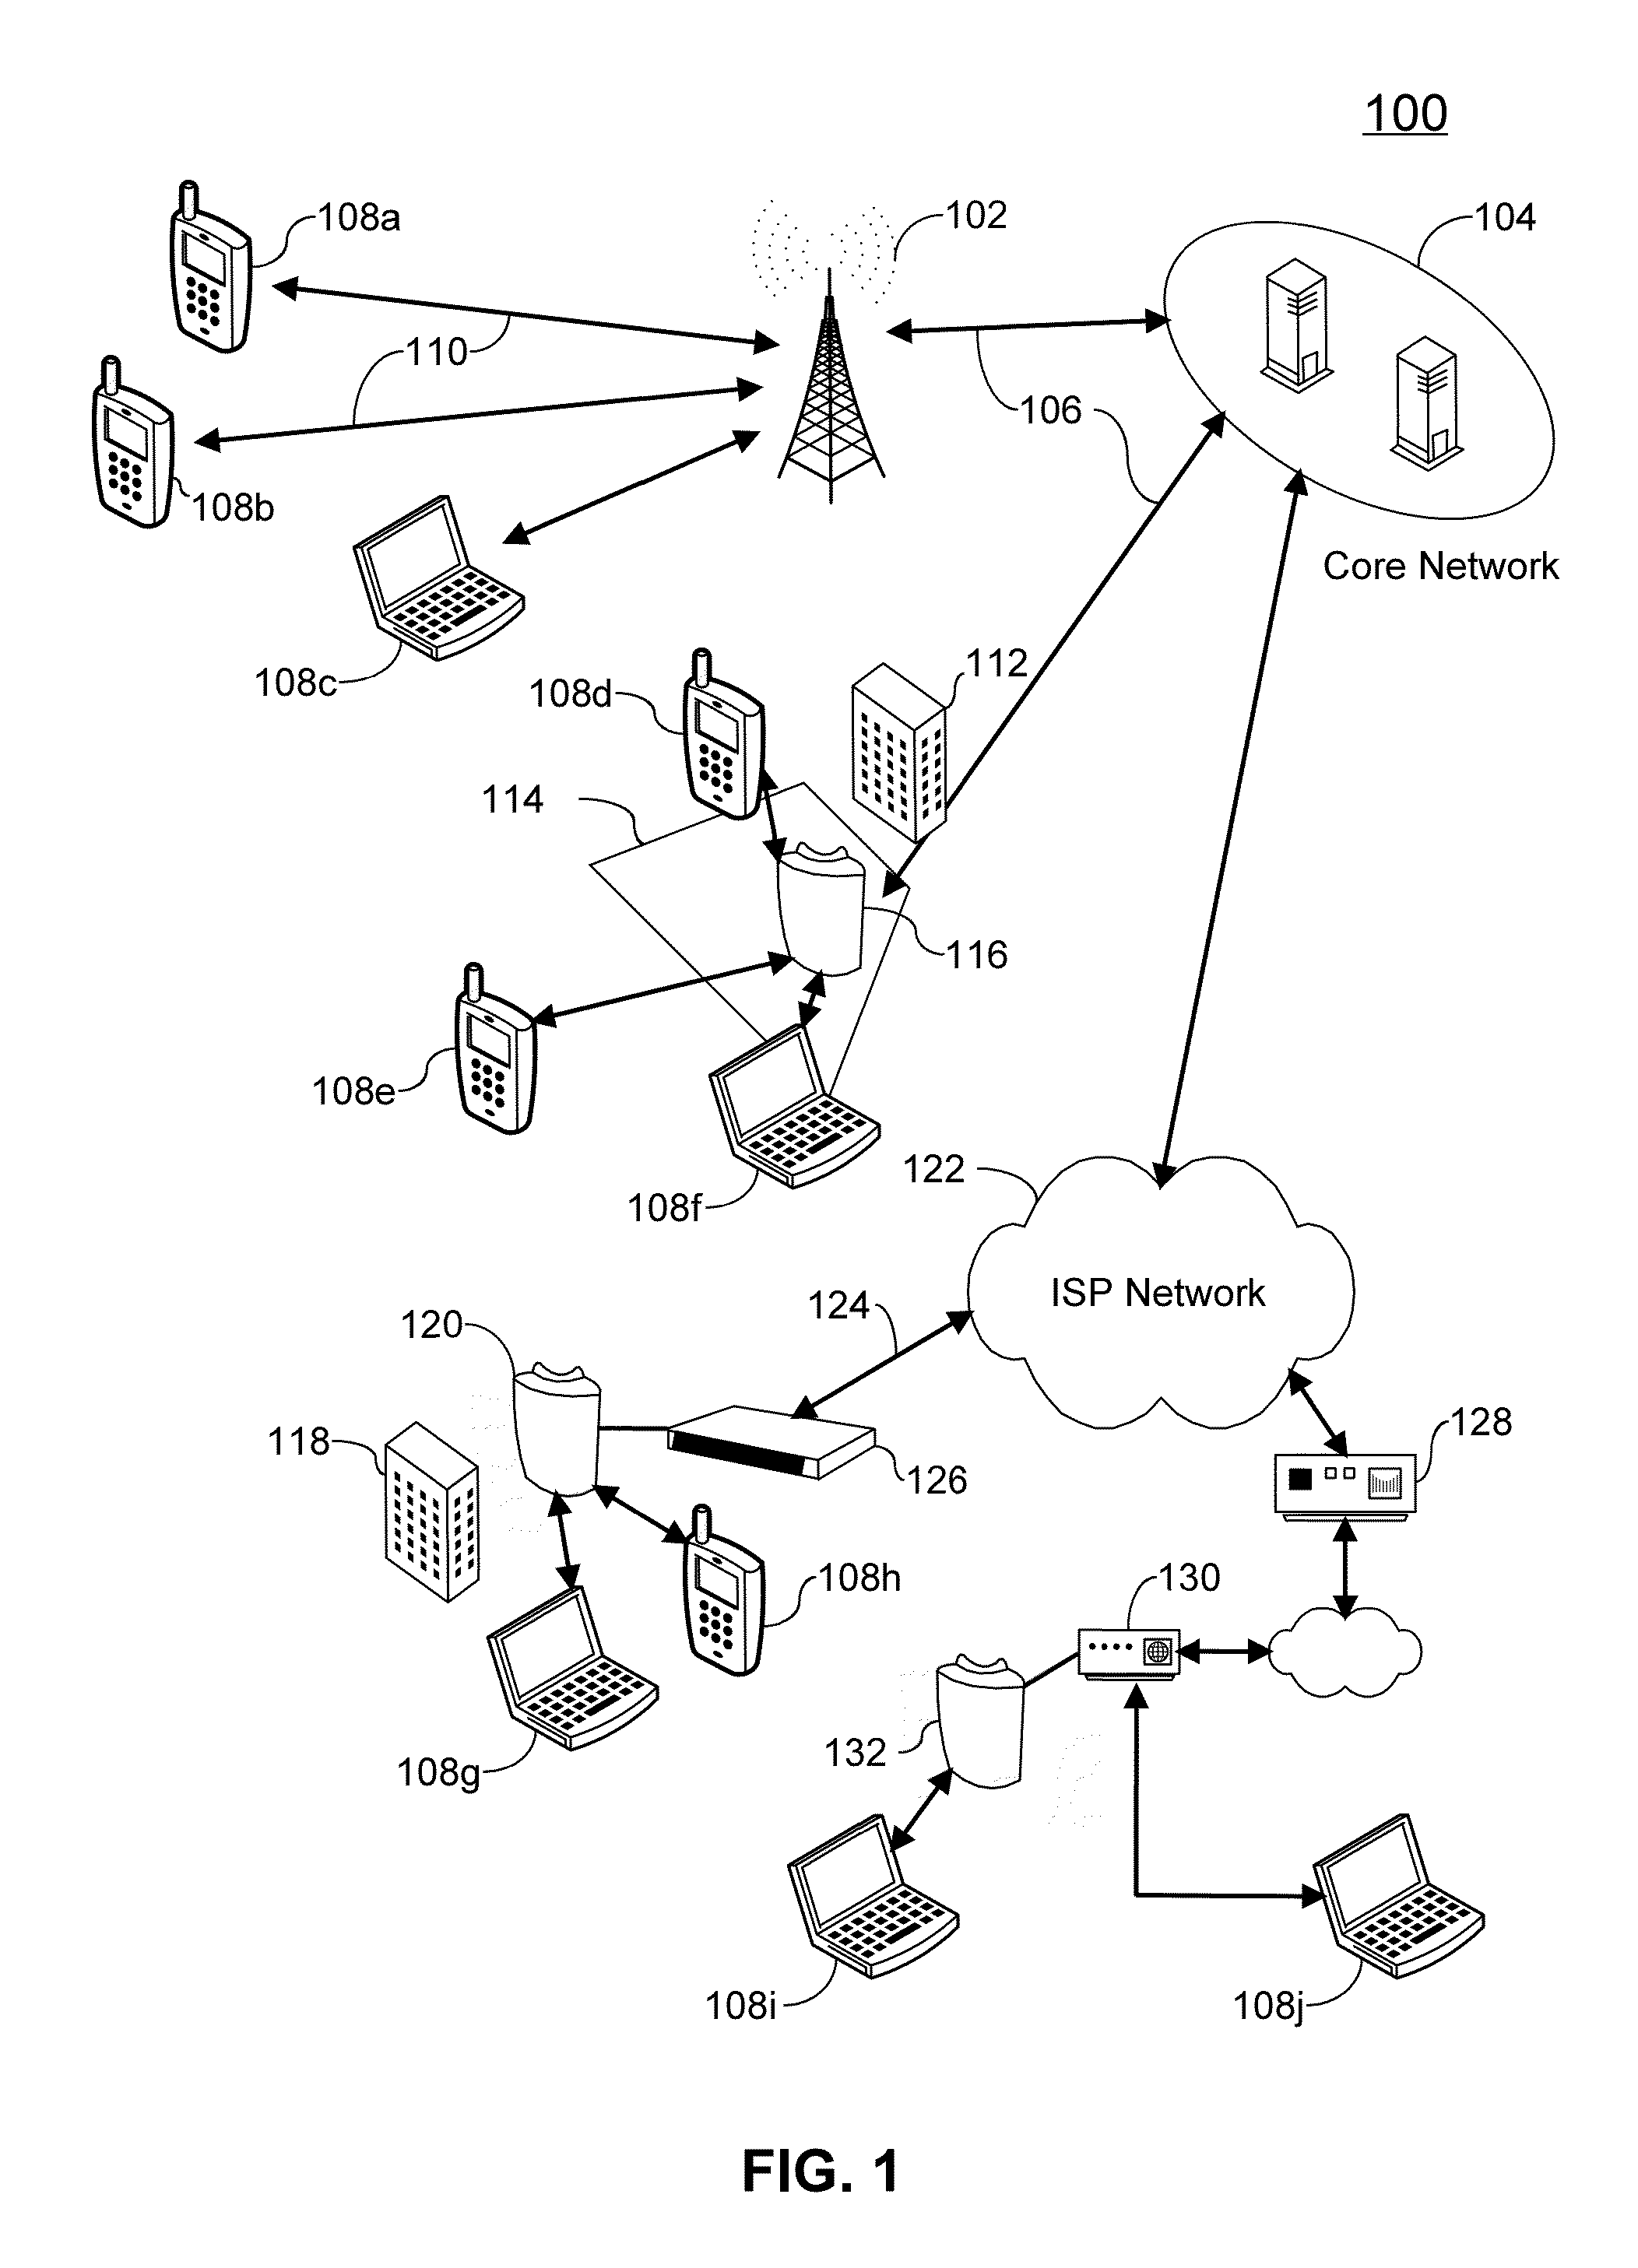 Network selection recommender system and method